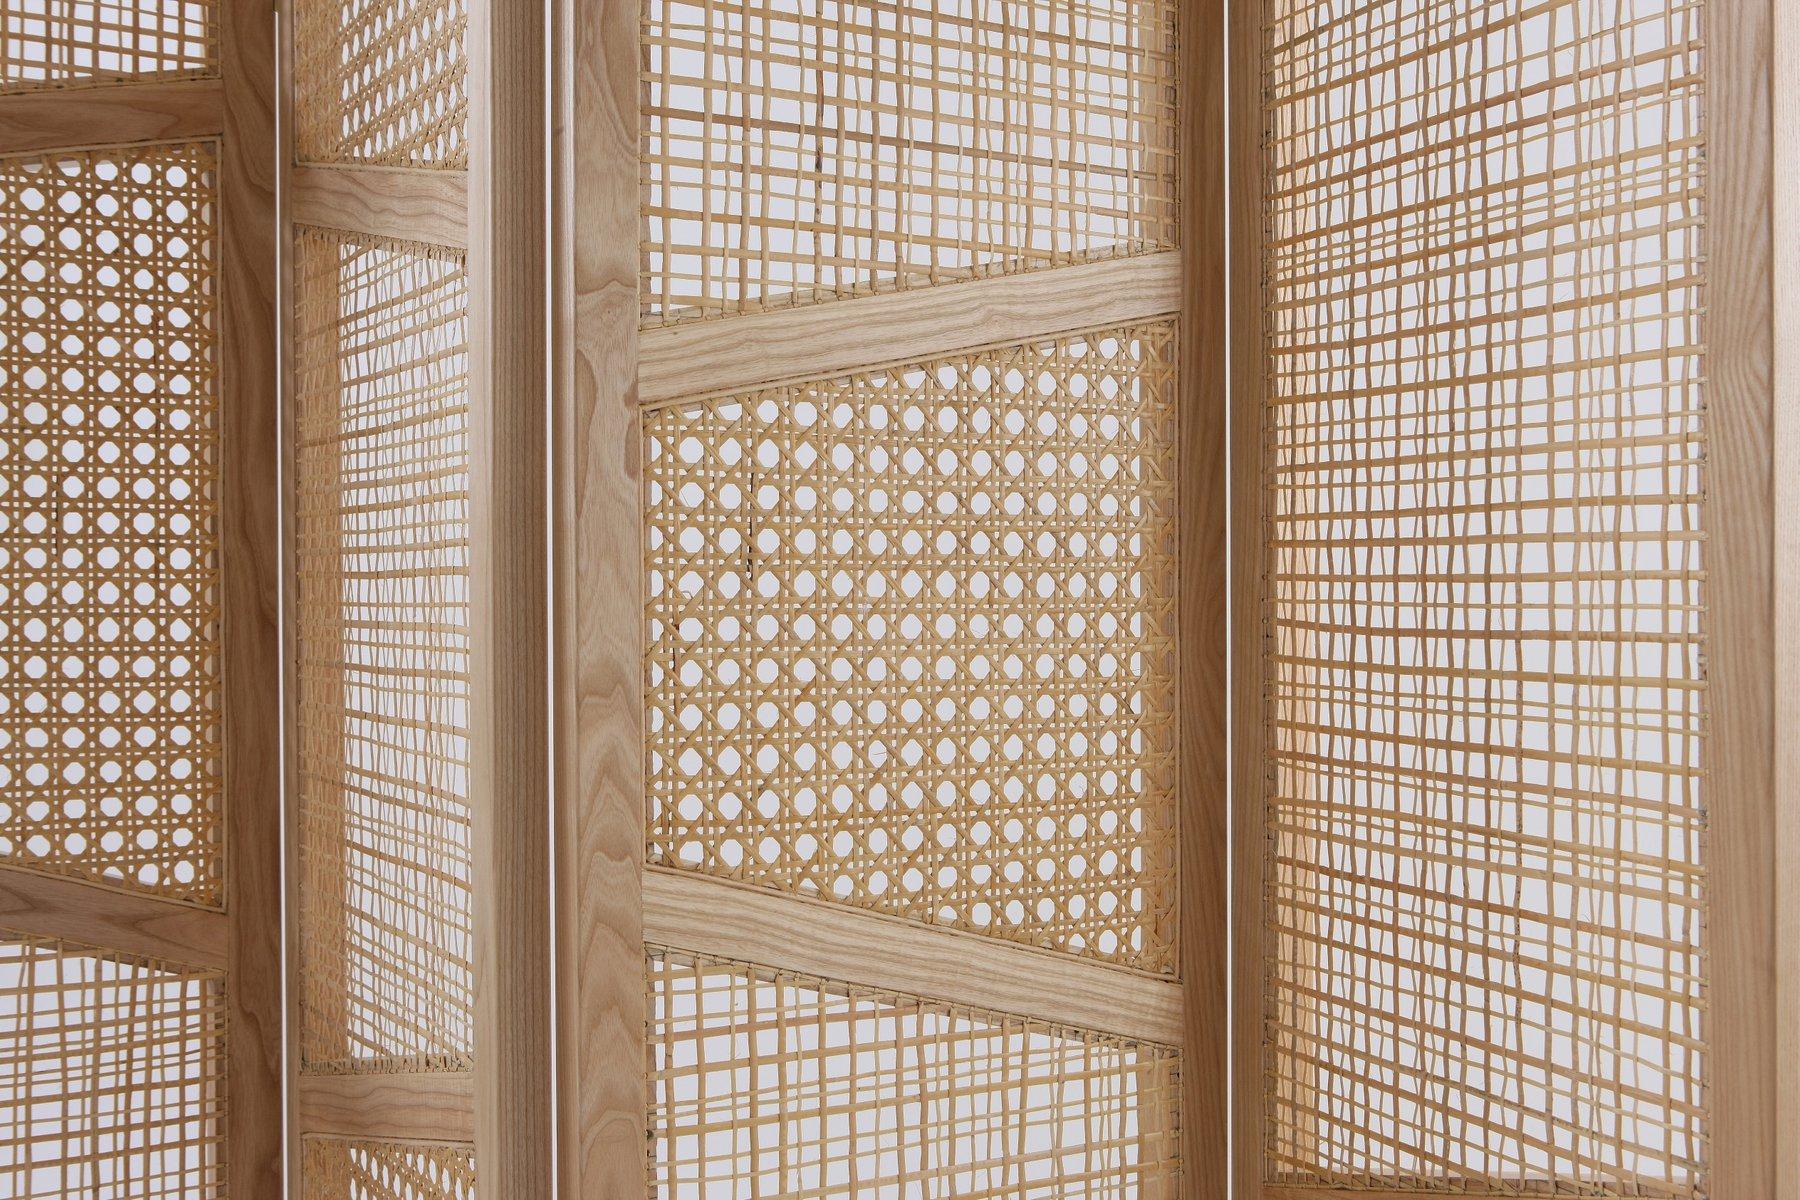 This midcentury style partition is defined by its striking angles and play on texture.
The handmade room divider filters light while maintaining privacy and a separation of spaces.
Material: Ashwood/straw
Color: Natural
Finish: Natural.
Please